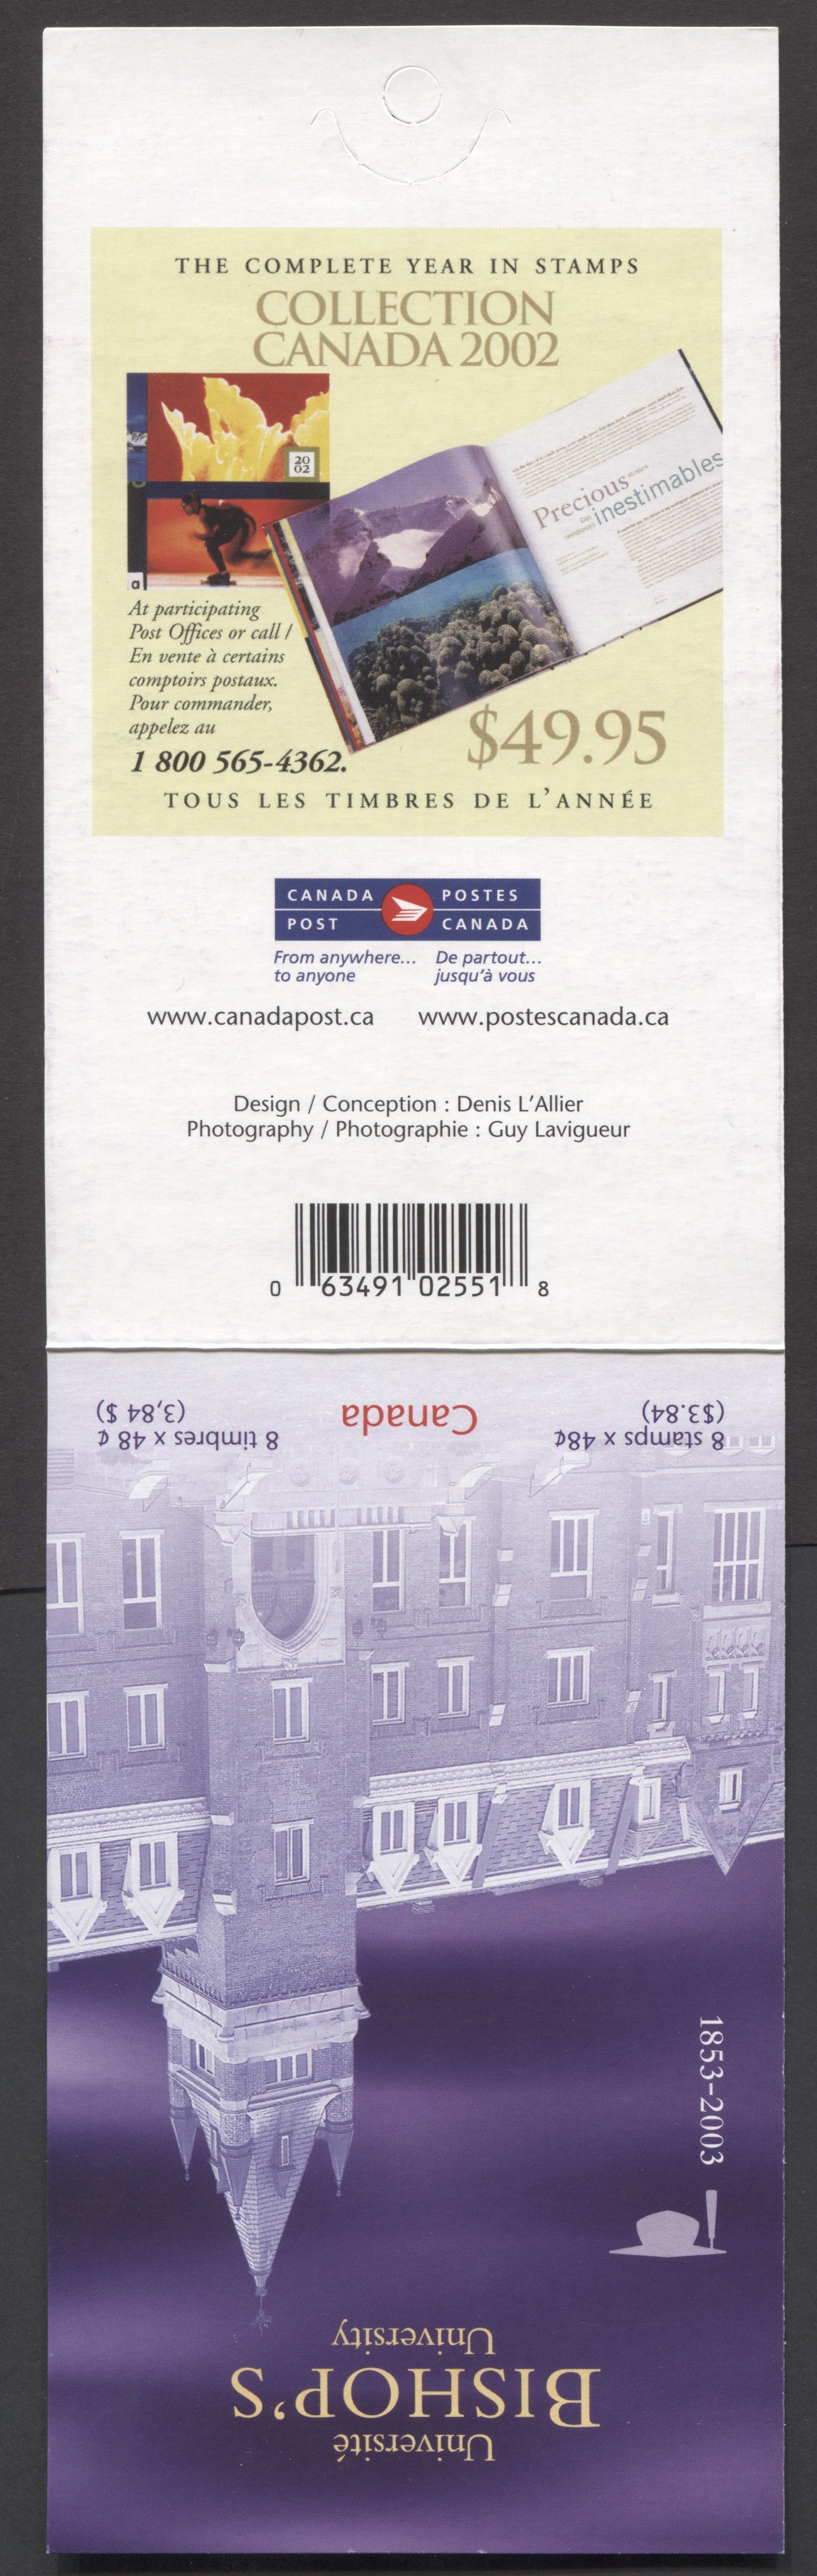 Canada #BK266a-b 2003 Bishop's University Issue, Complete $2.88 Booklet, Tullis Russell Coatings Paper, Dead Paper, 4 mm GT-4 Tagging